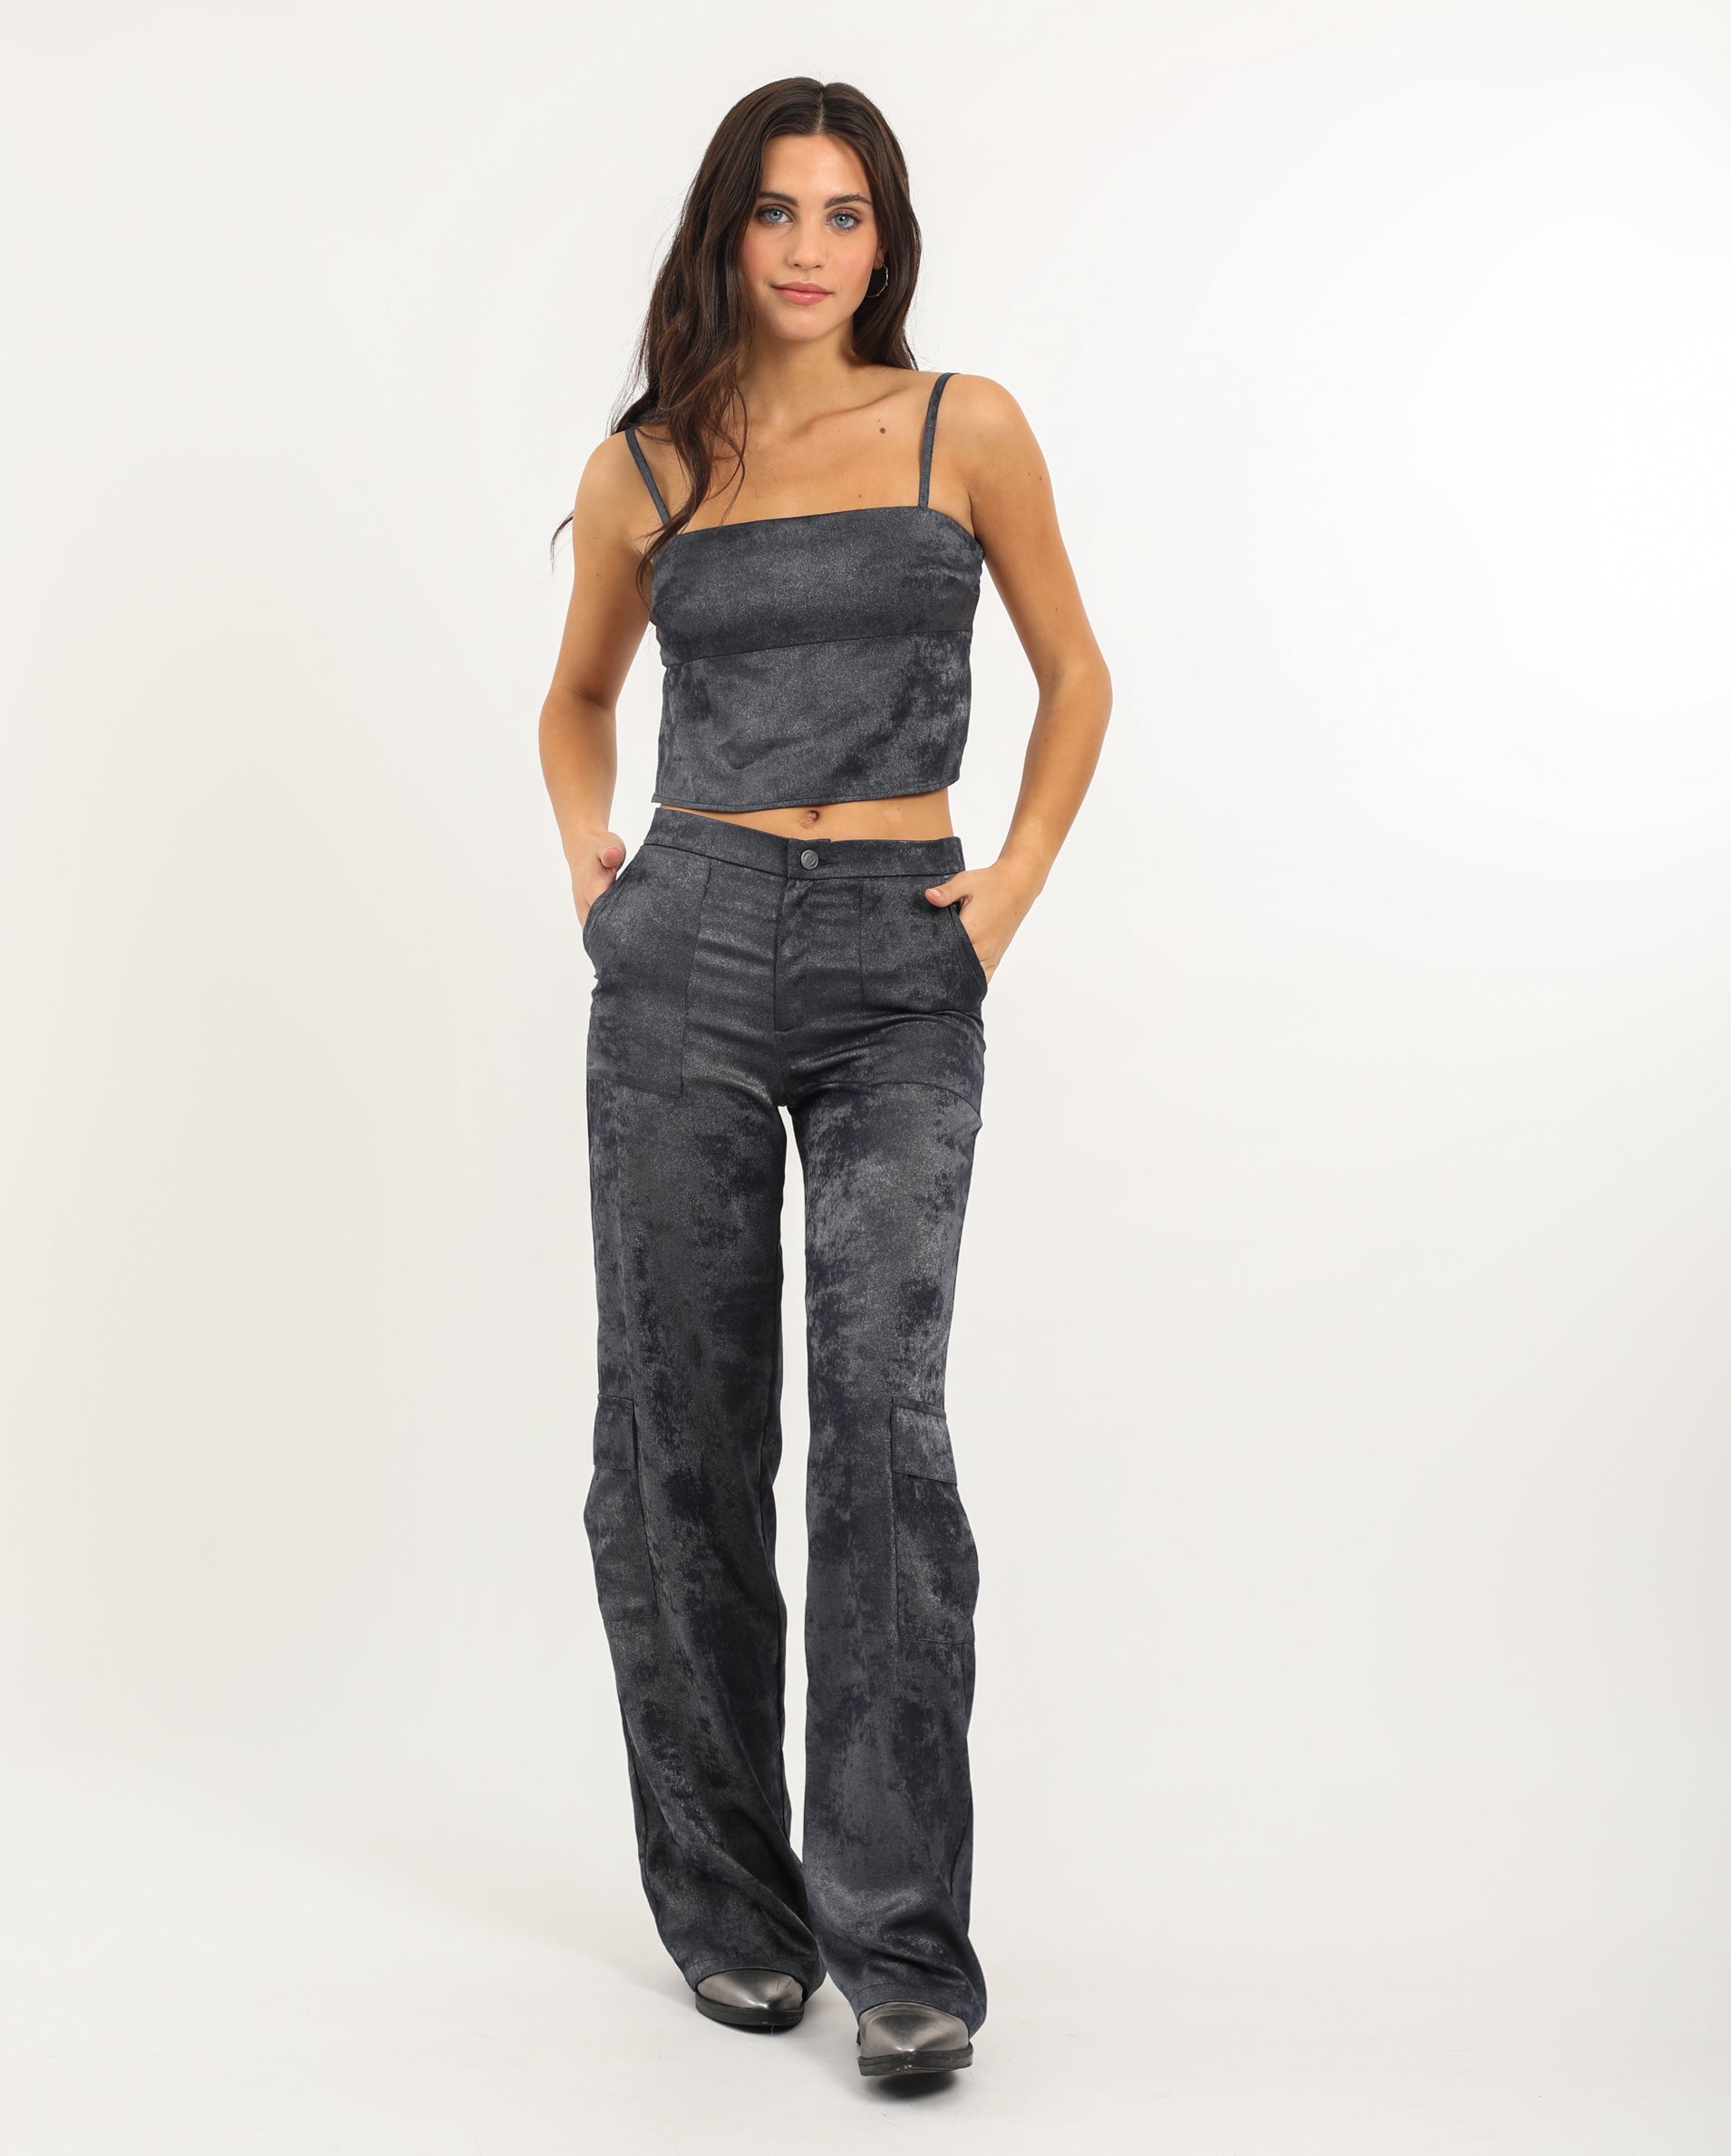 NIGHT CONFESSIONS TROUSERS - LEAD